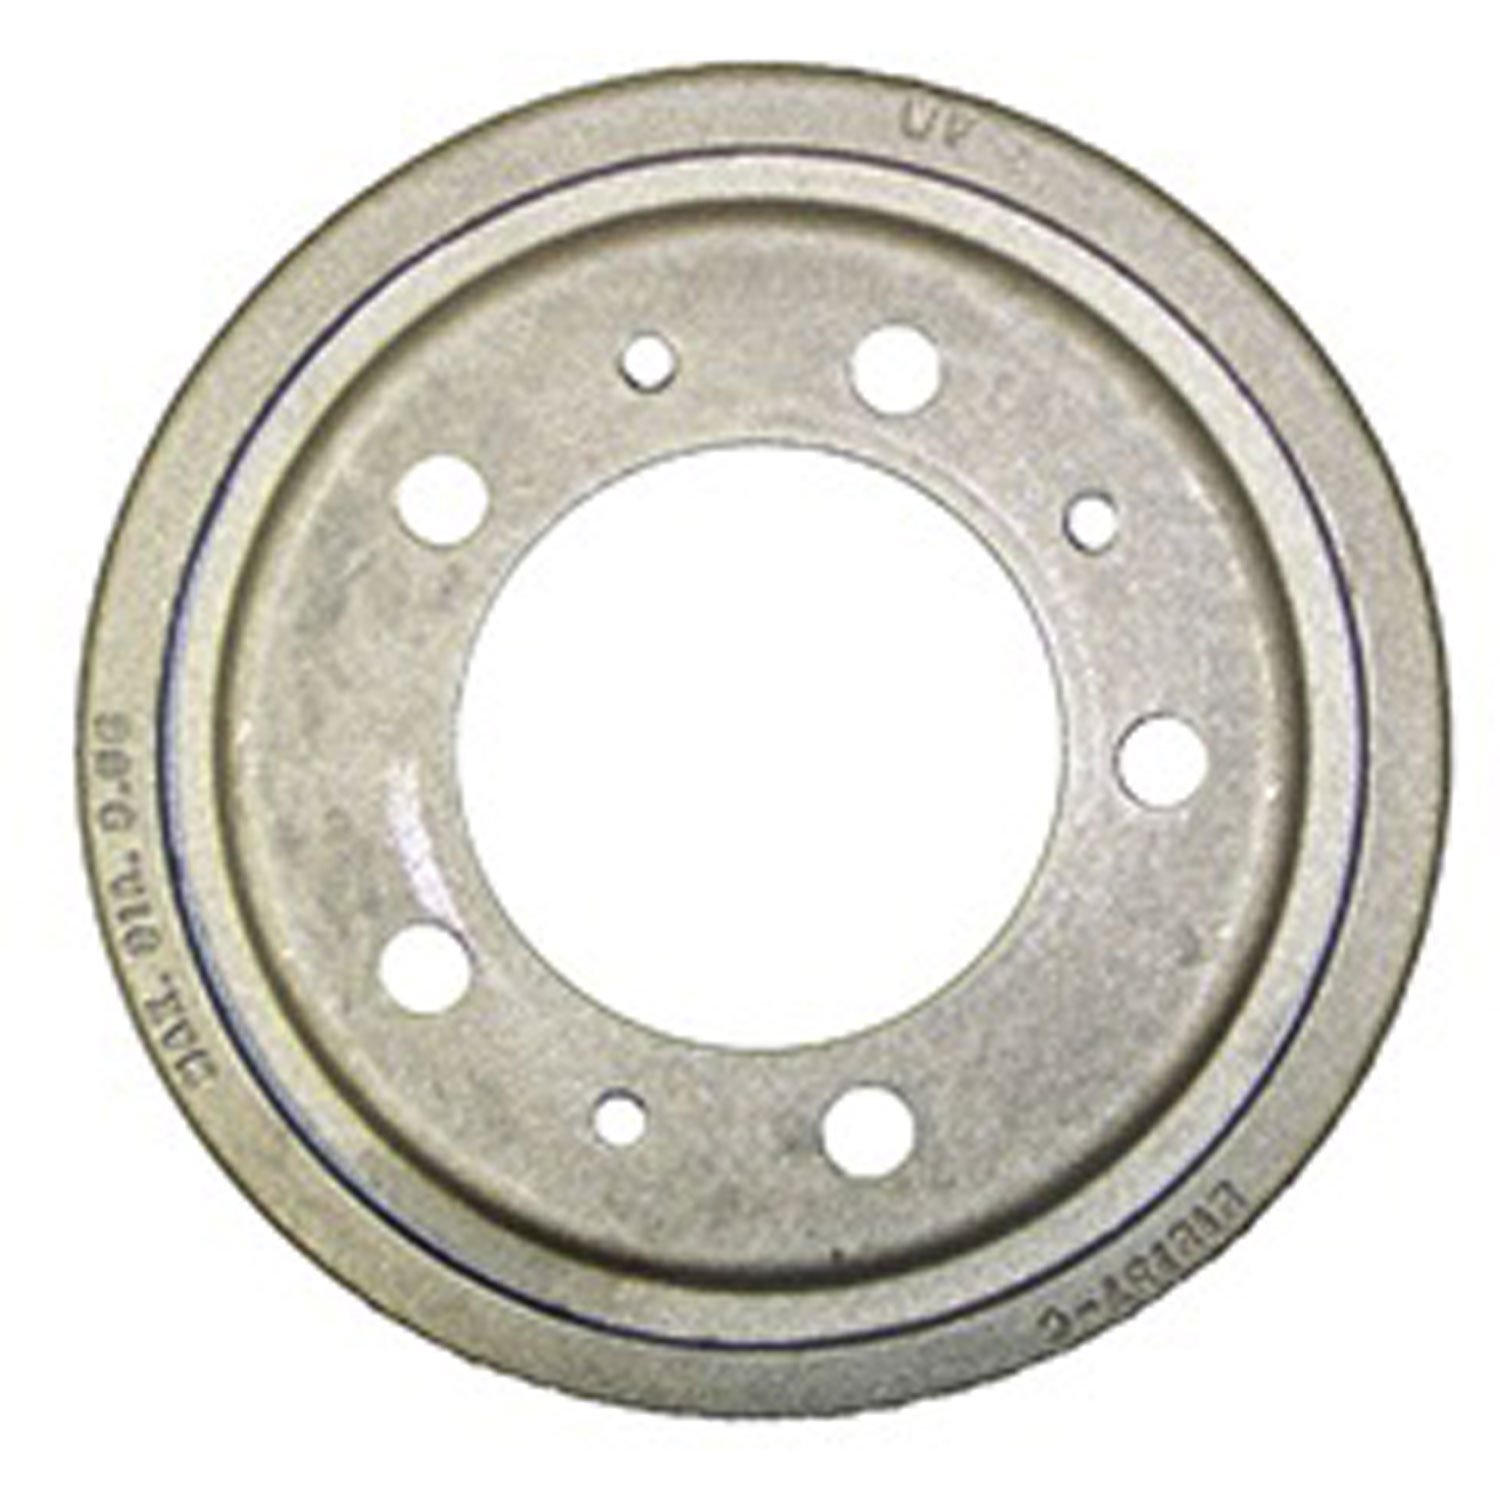 Factory-style replacement 9 inch x 1.75 inch brake drum from Omix-ADA, Fits 53-71 Willys models, Fits front or rear axle.